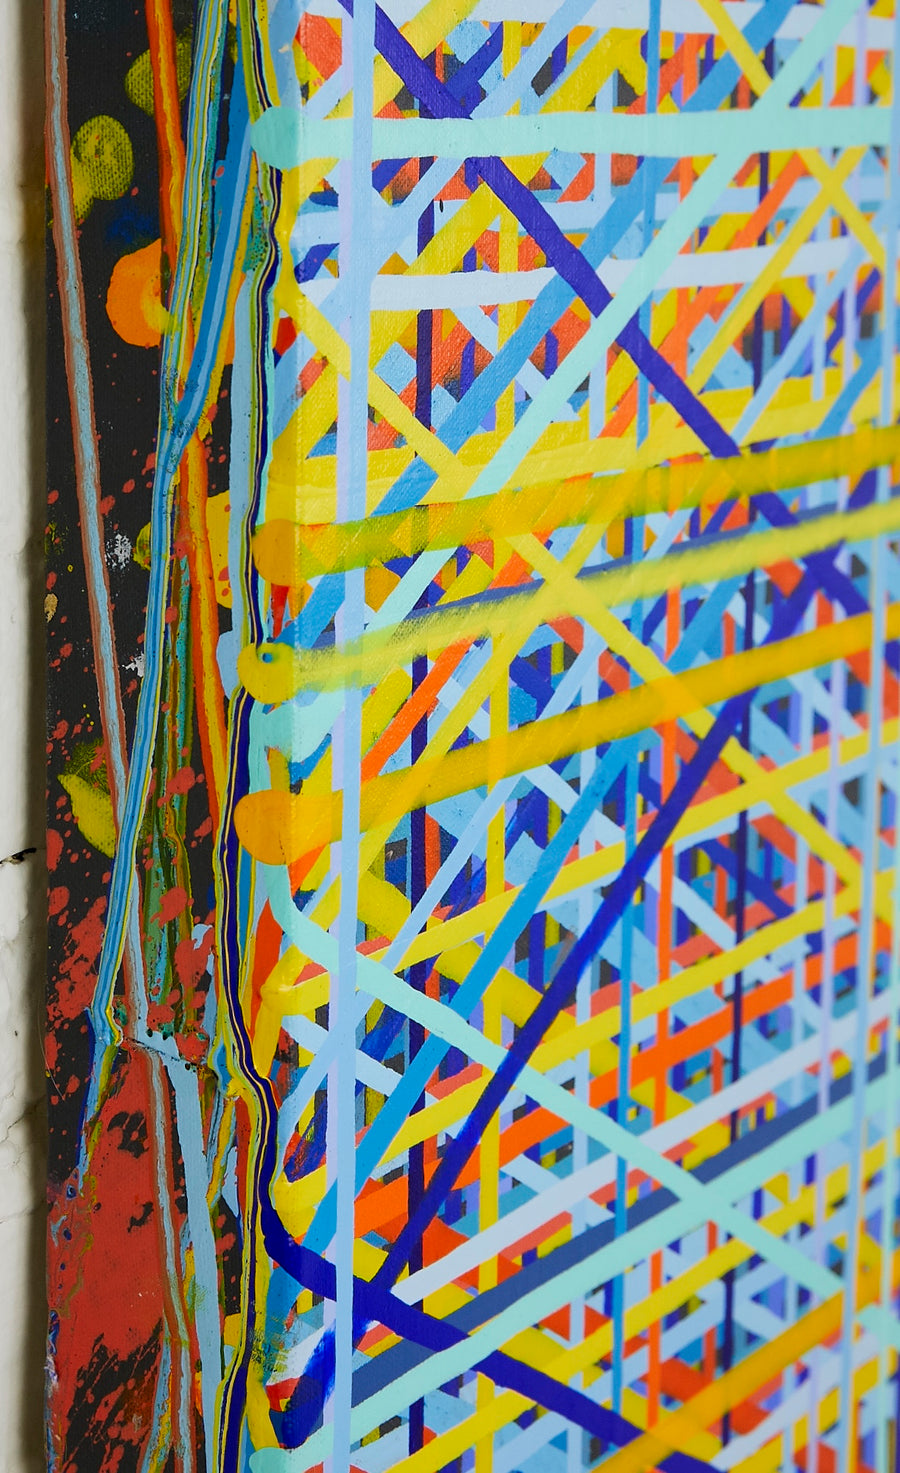 Detail shot of colorful drip painting by abstract artist Jon James. represented by Tuleste Factory in New York City.